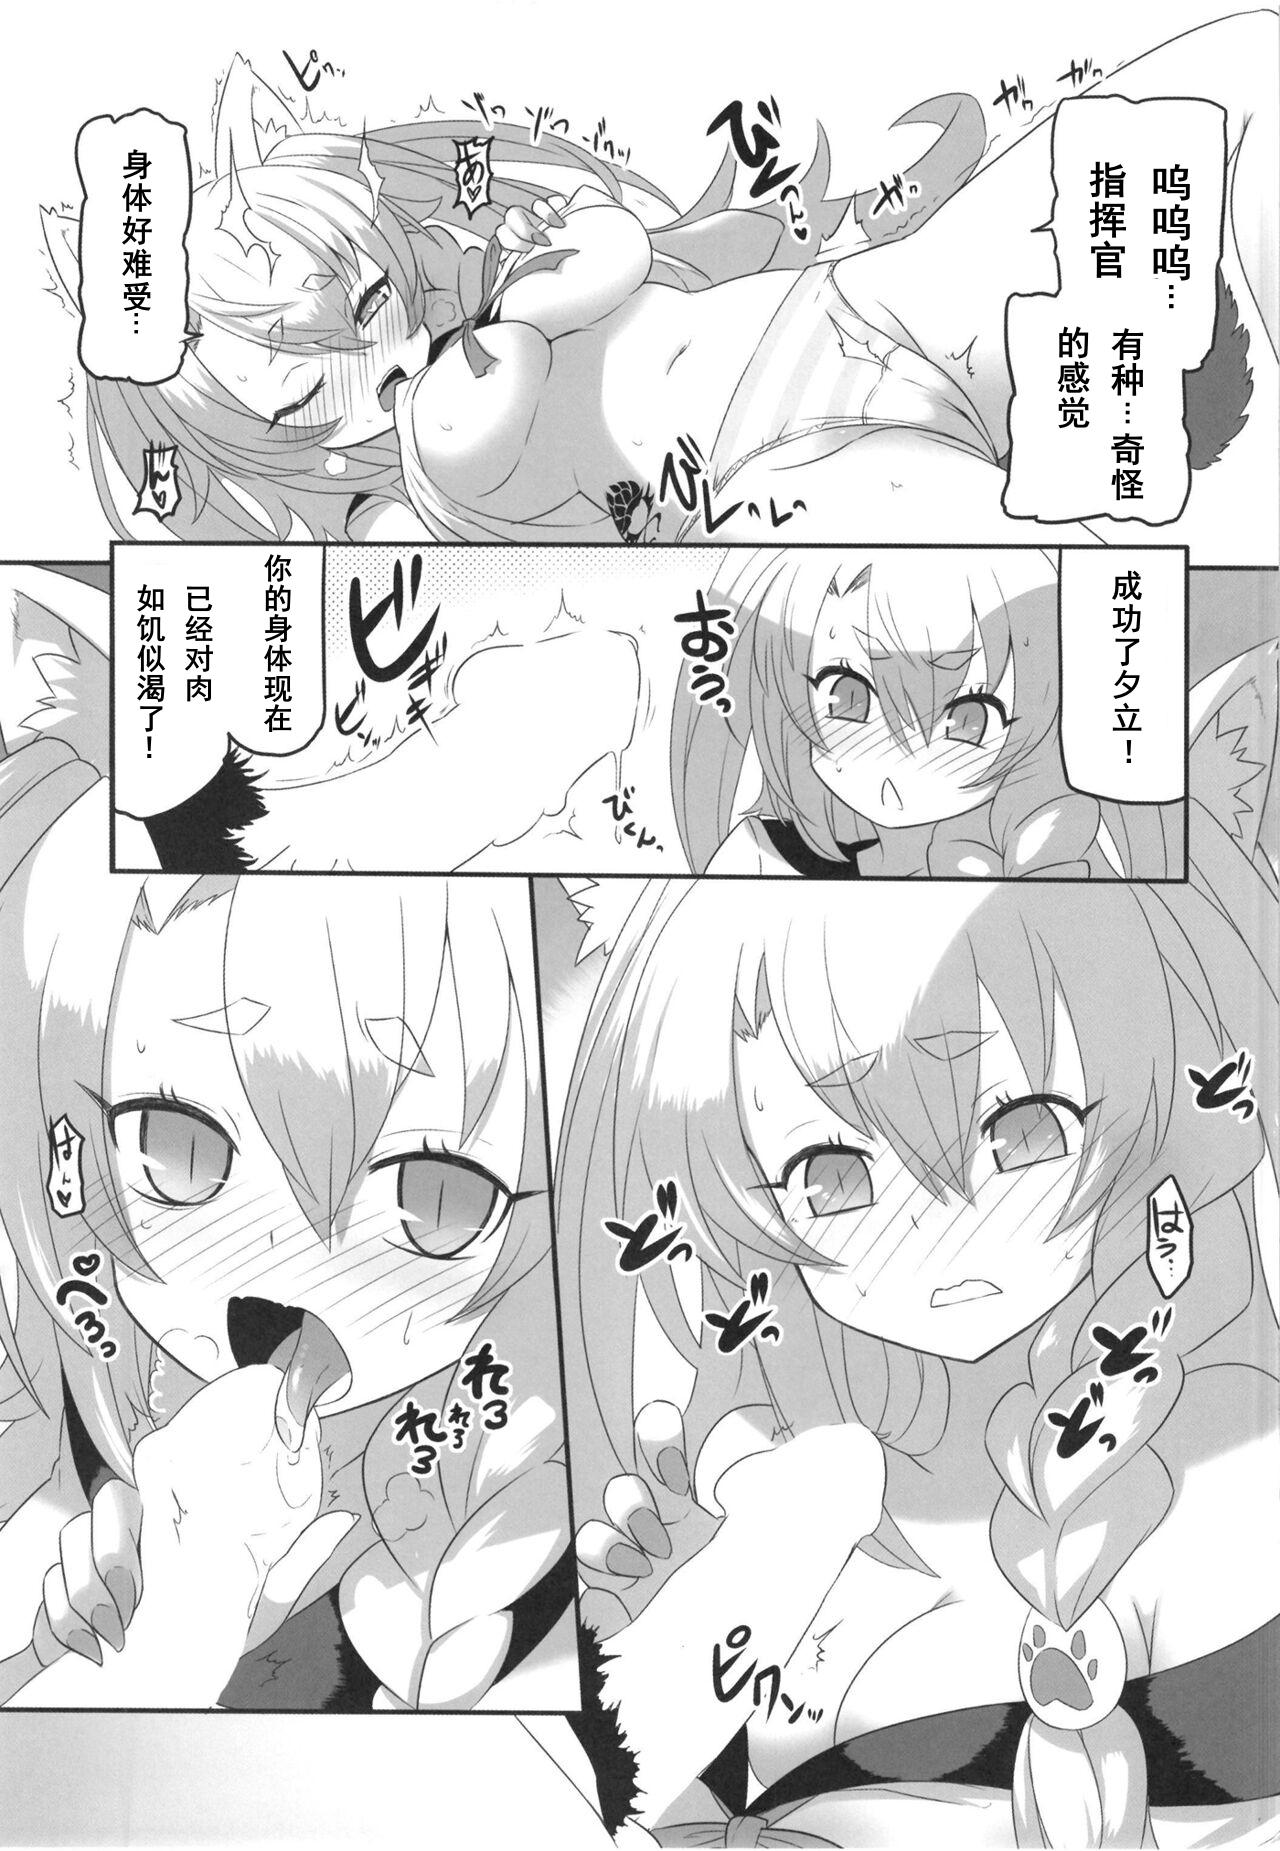 Blows Yuudachi to Oishii Oniku - Yudachi and delicious meat - Azur lane 4some - Page 10